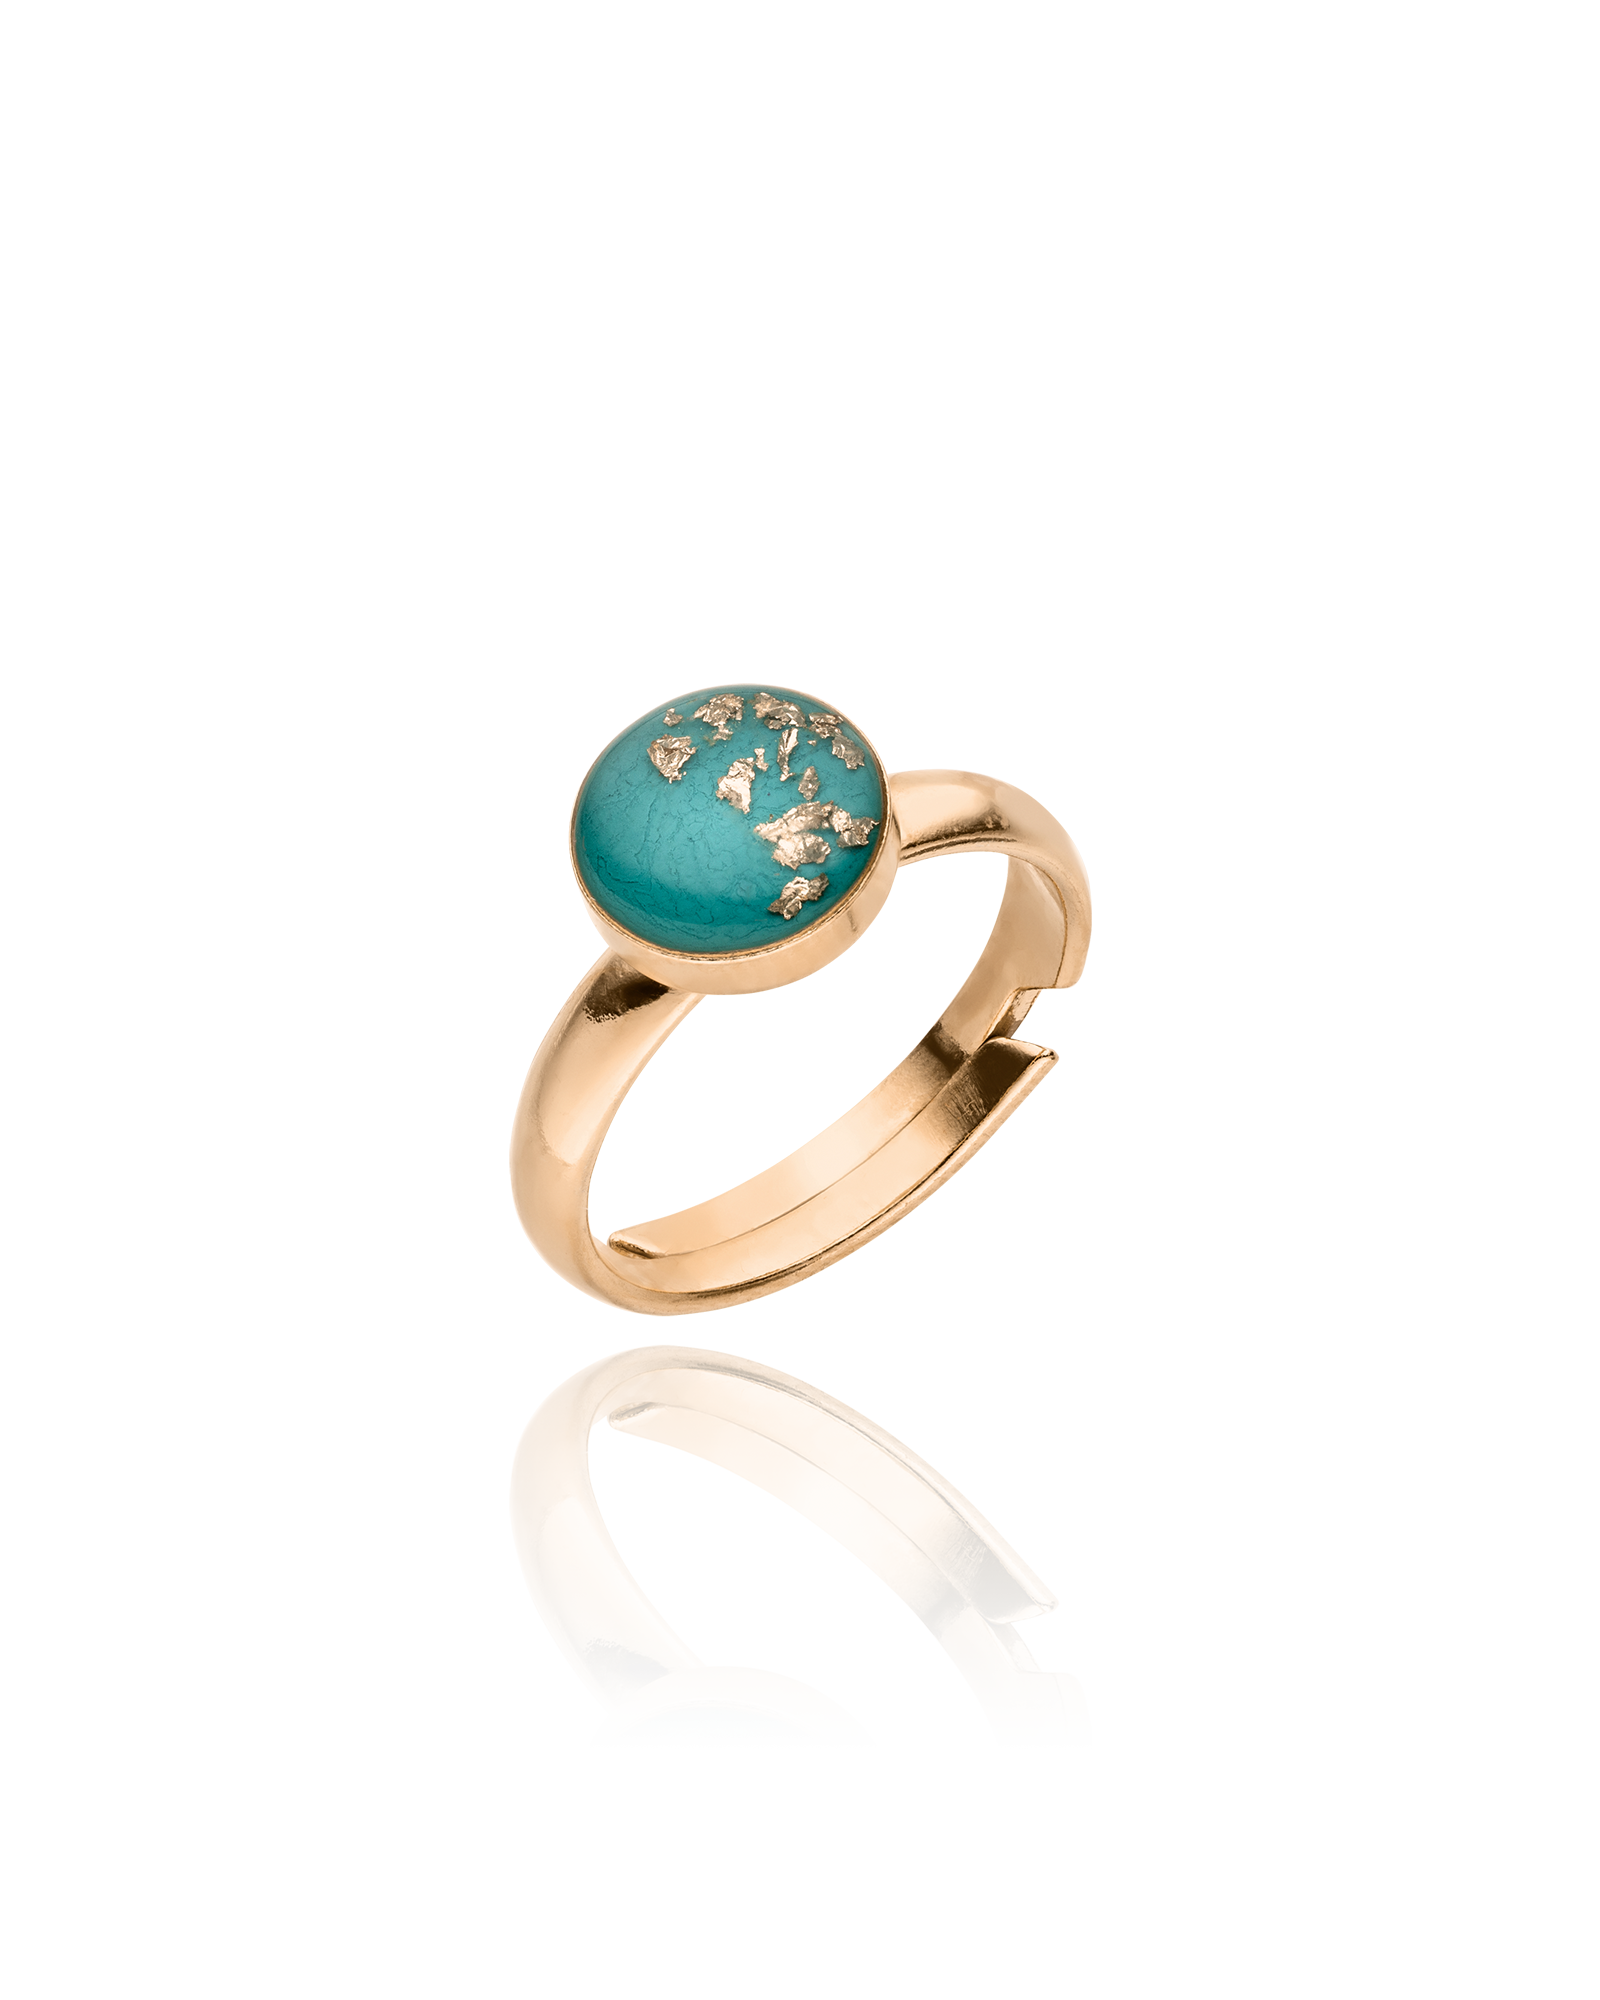 Ring Turquoise Perfection